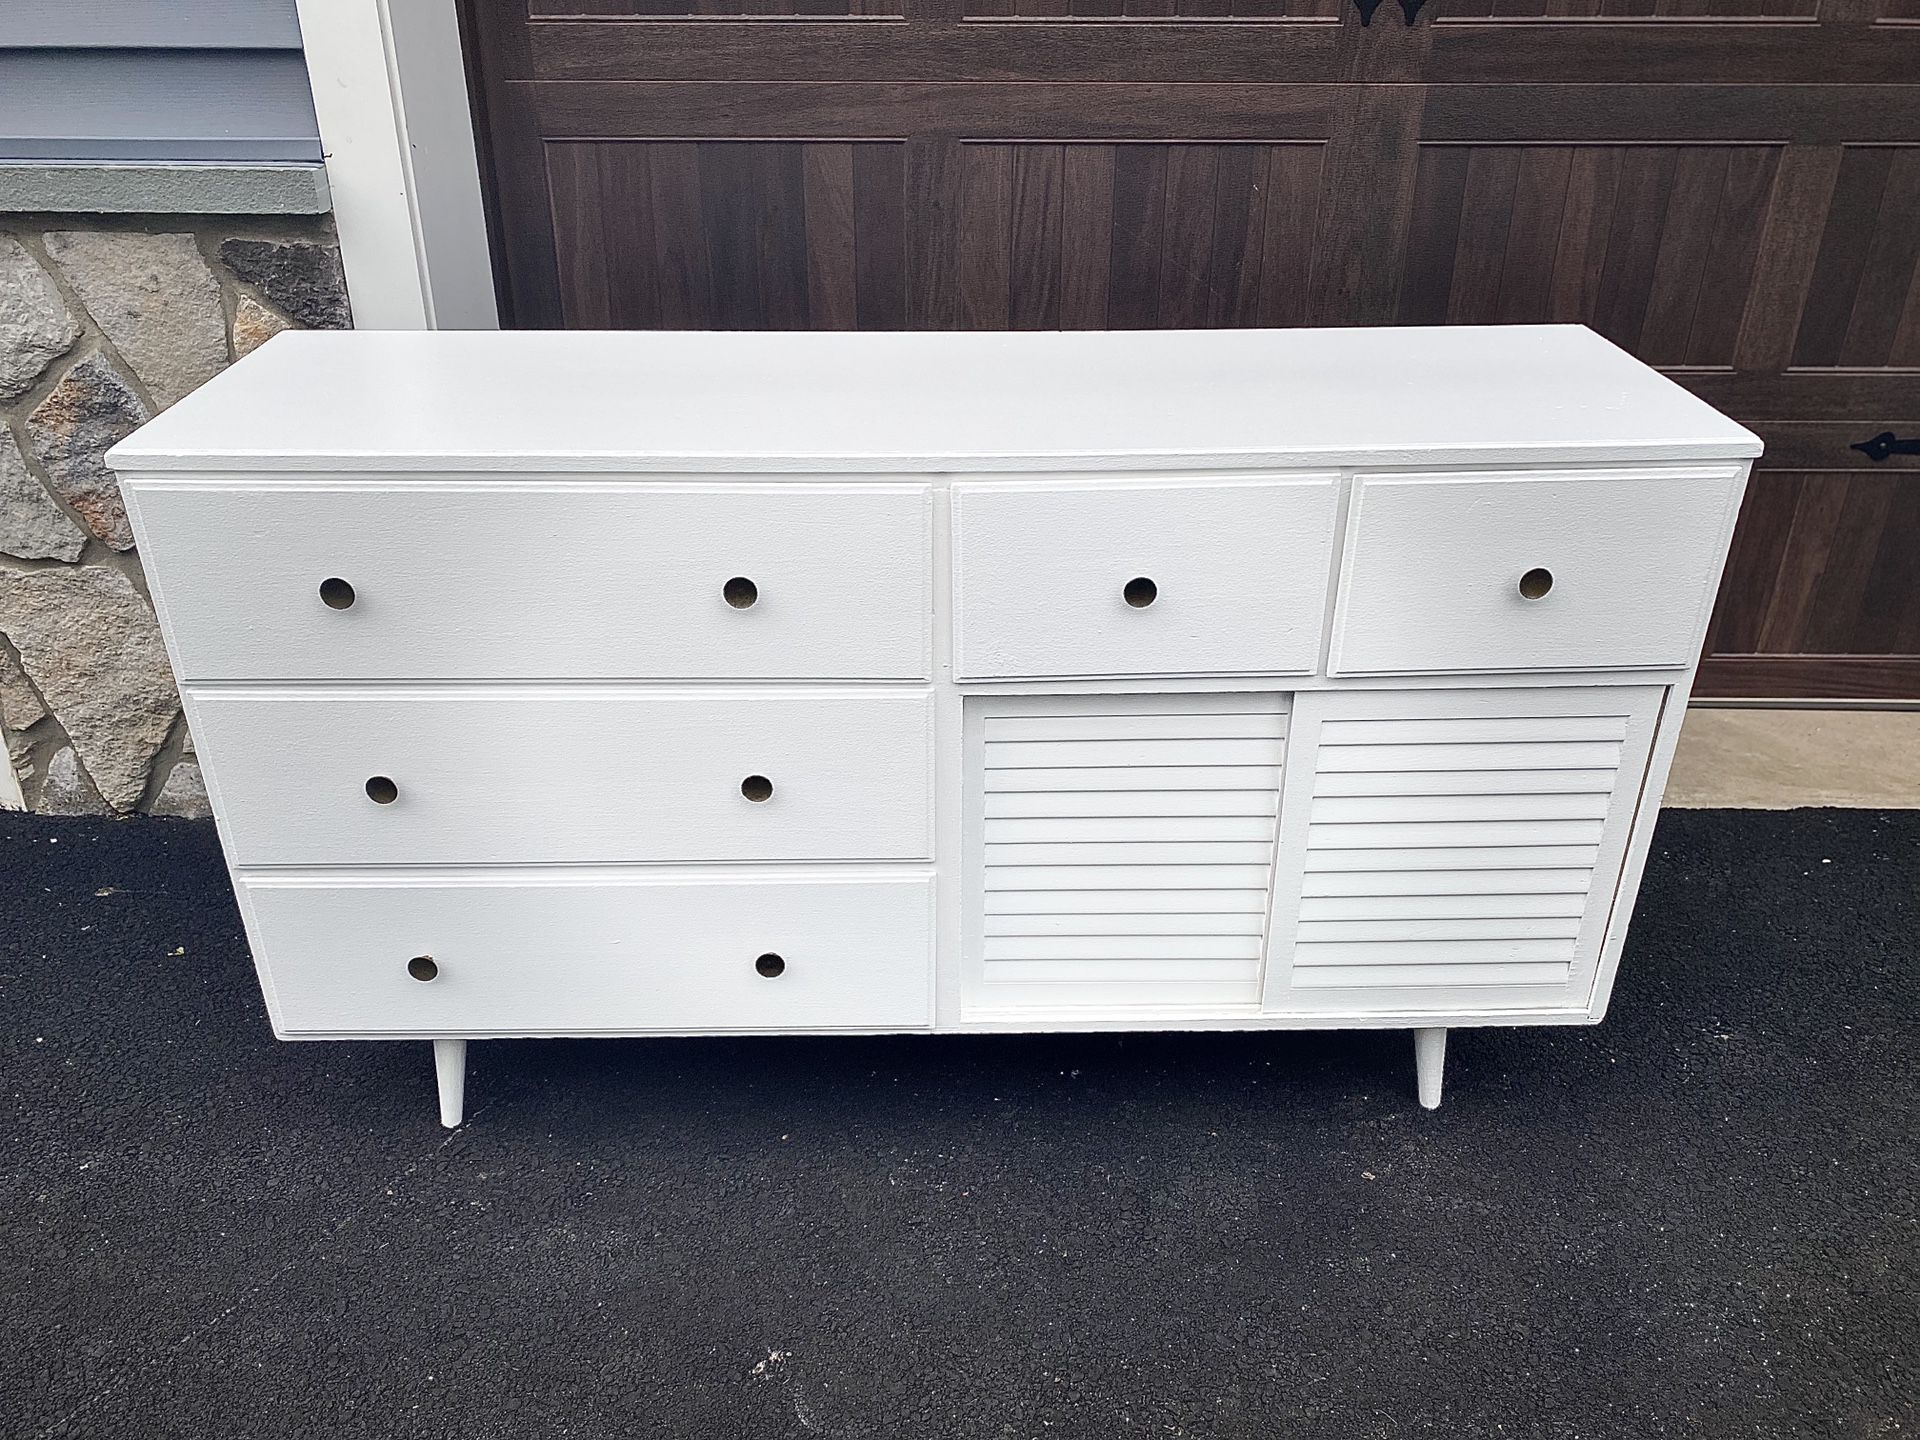 Dresser / server table for bedroom, kitchen, or bar area! FRESH painted & NEW knobs! YOU CAN PICK UP TODAY!